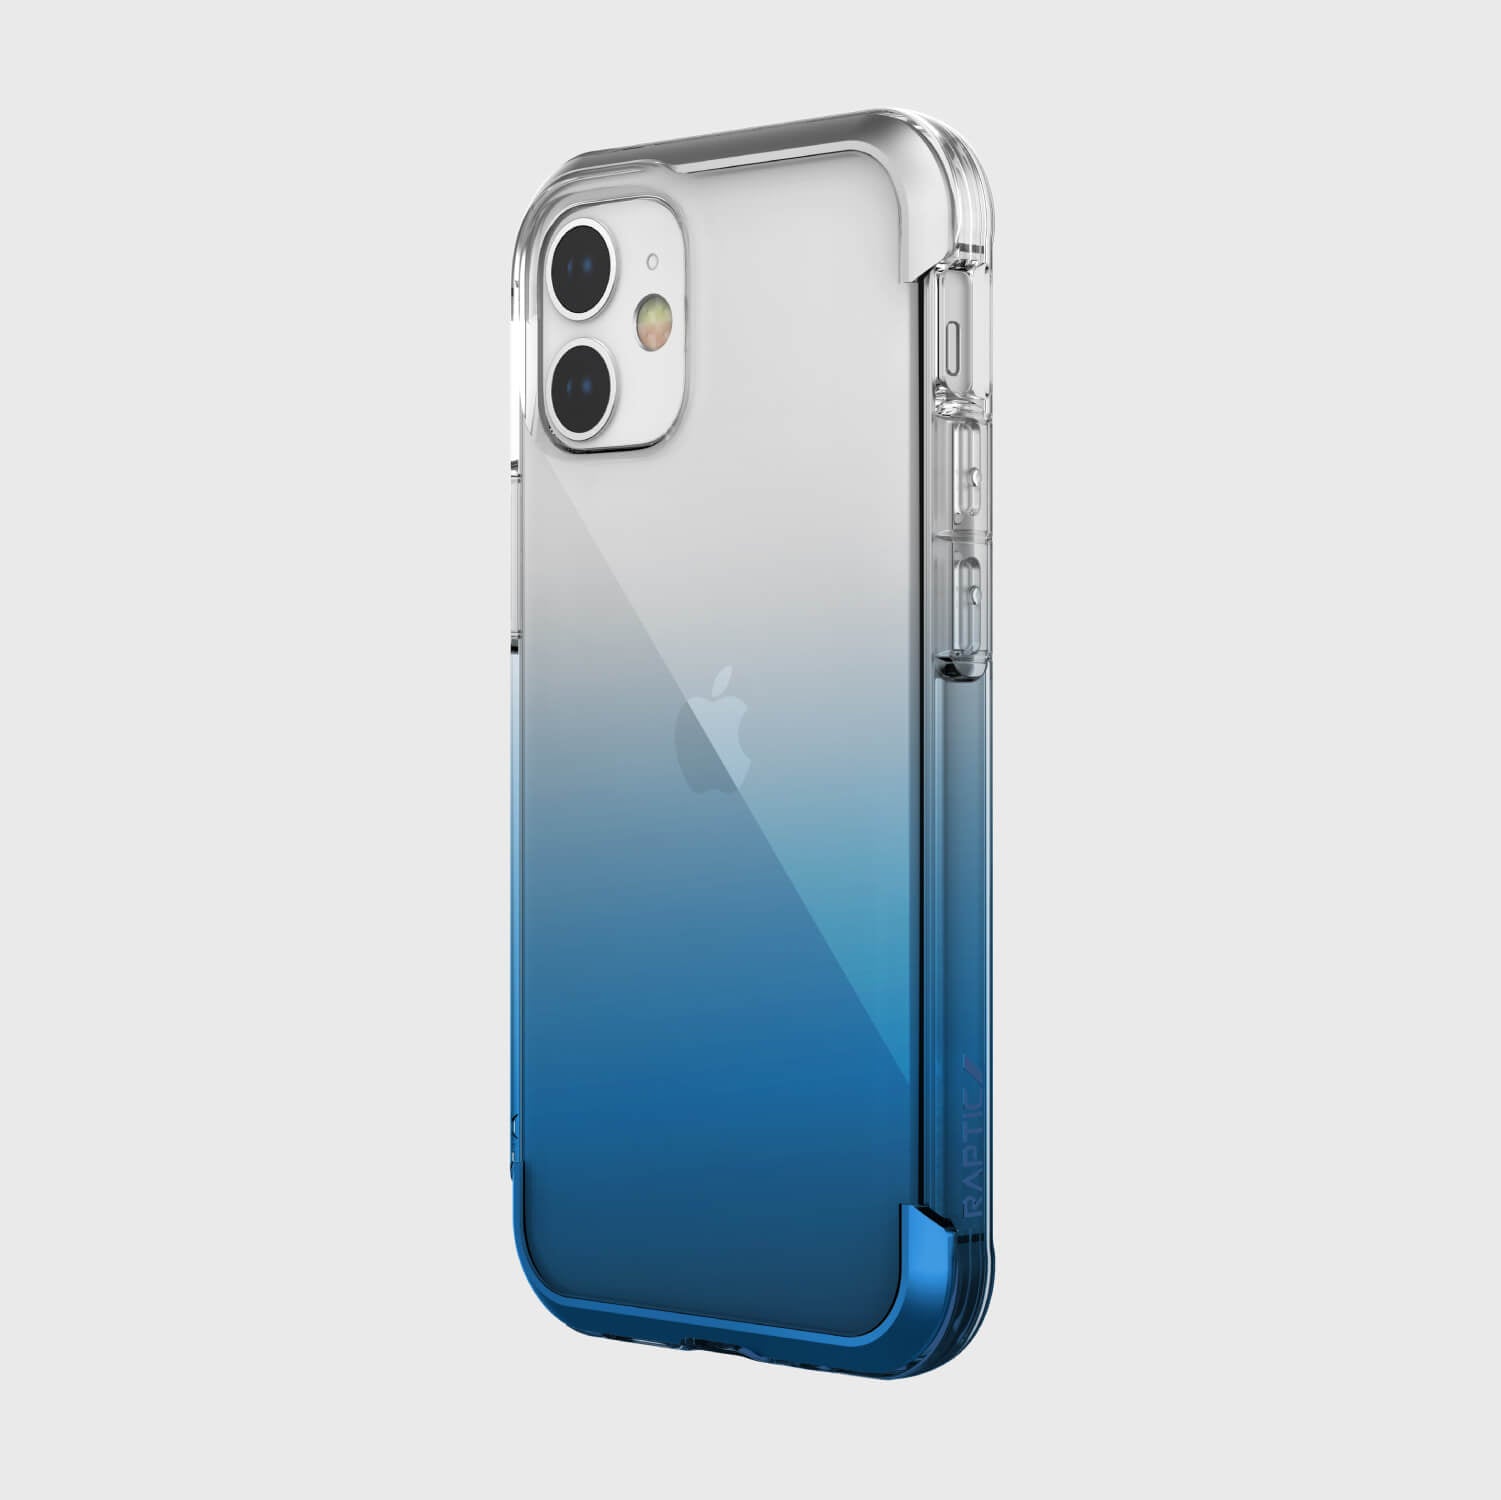 The back of an iPhone 12 Mini Case - Air by Raptic in blue and white with drop protection.